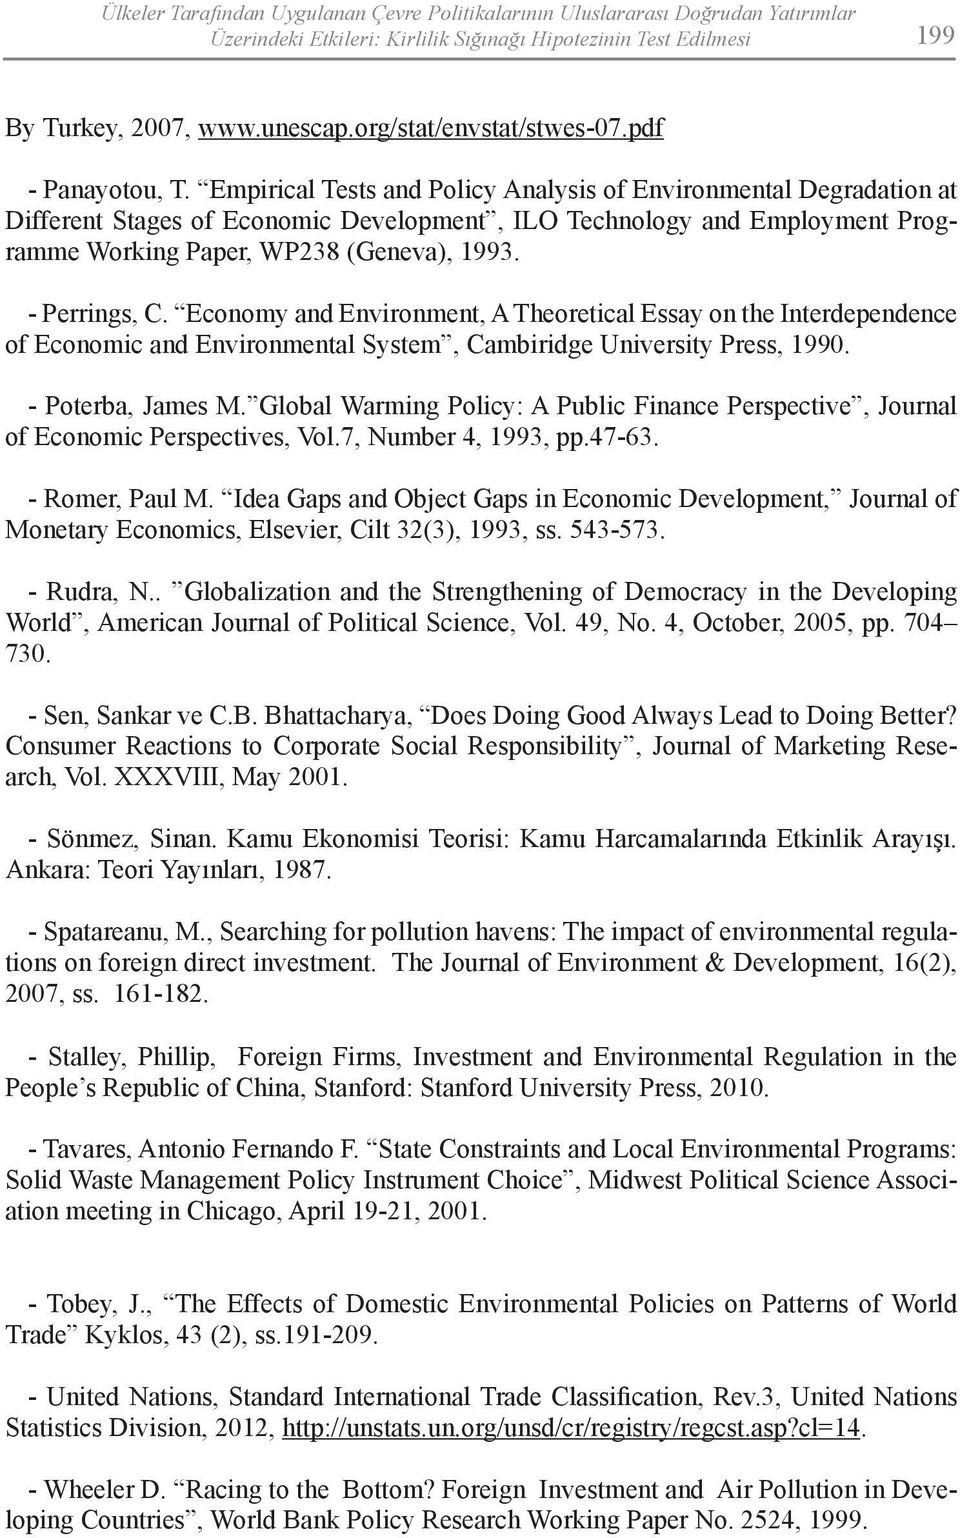 Empirical Tests and Policy Analysis of Environmental Degradation at Different Stages of Economic Development, ILO Technology and Employment Programme Working Paper, WP238 (Geneva), 1993.